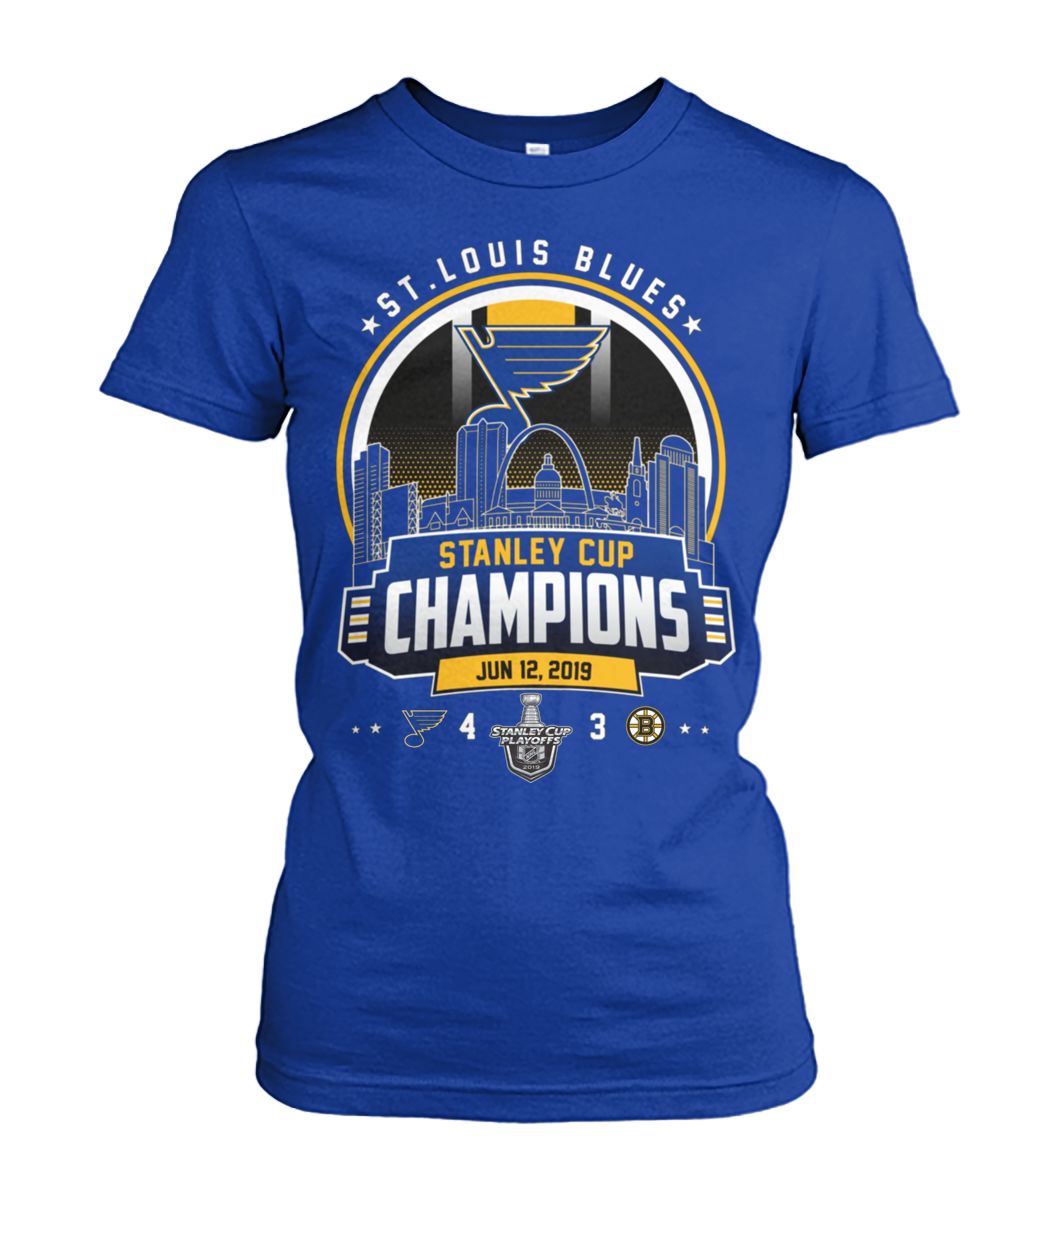 St louis blues 4-3 boston bruins stanley cup champions june 12th 2019 women's crew tee